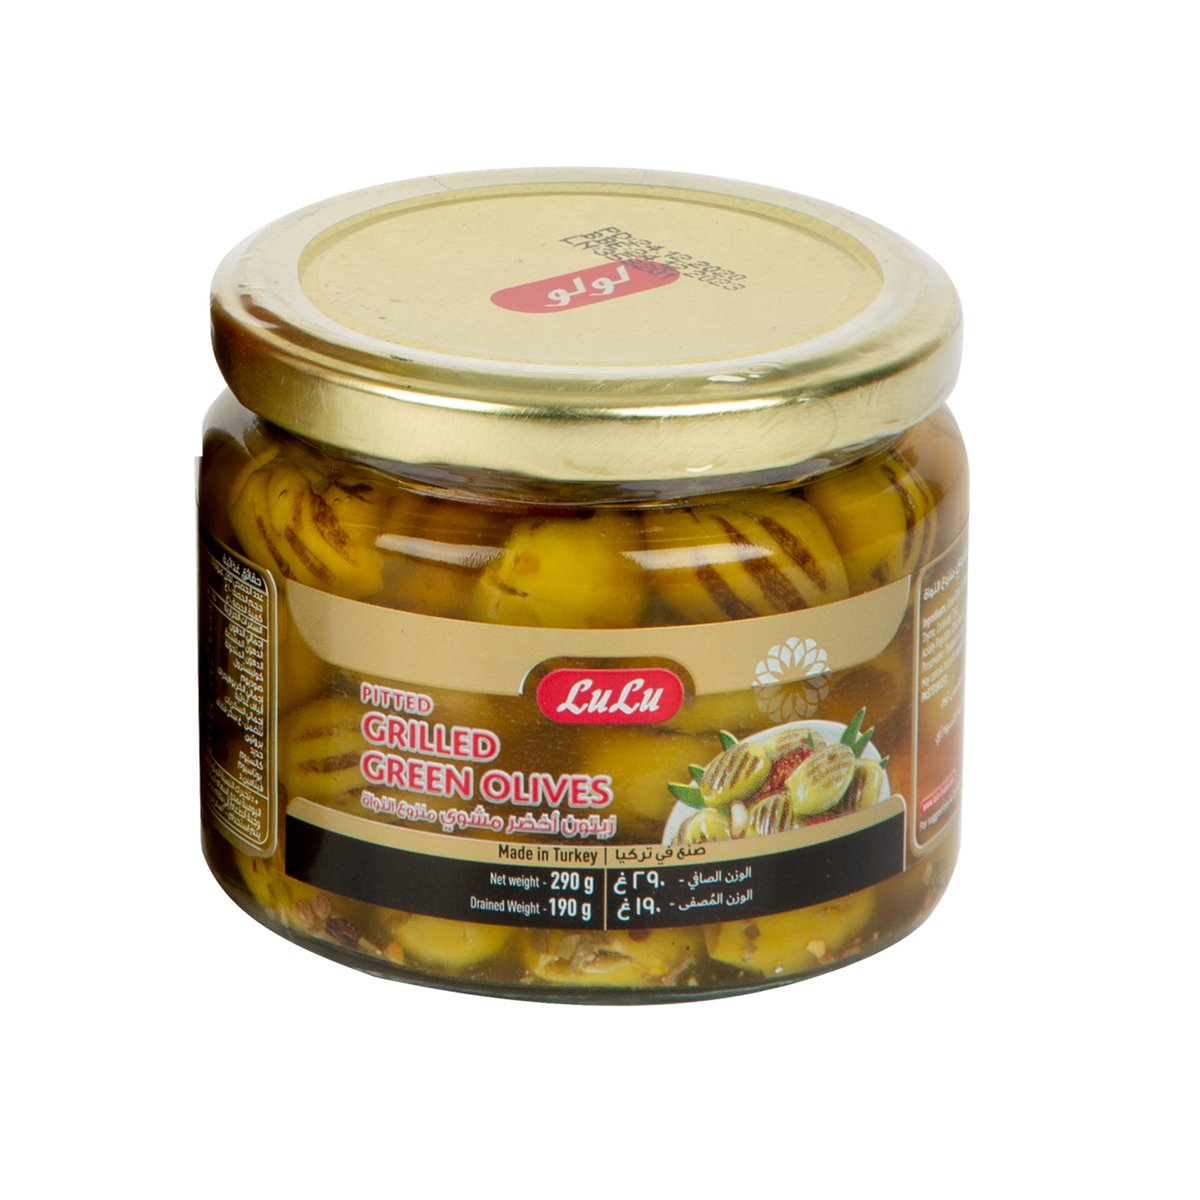 LuLu Pitted Grilled Green Olives 290 g